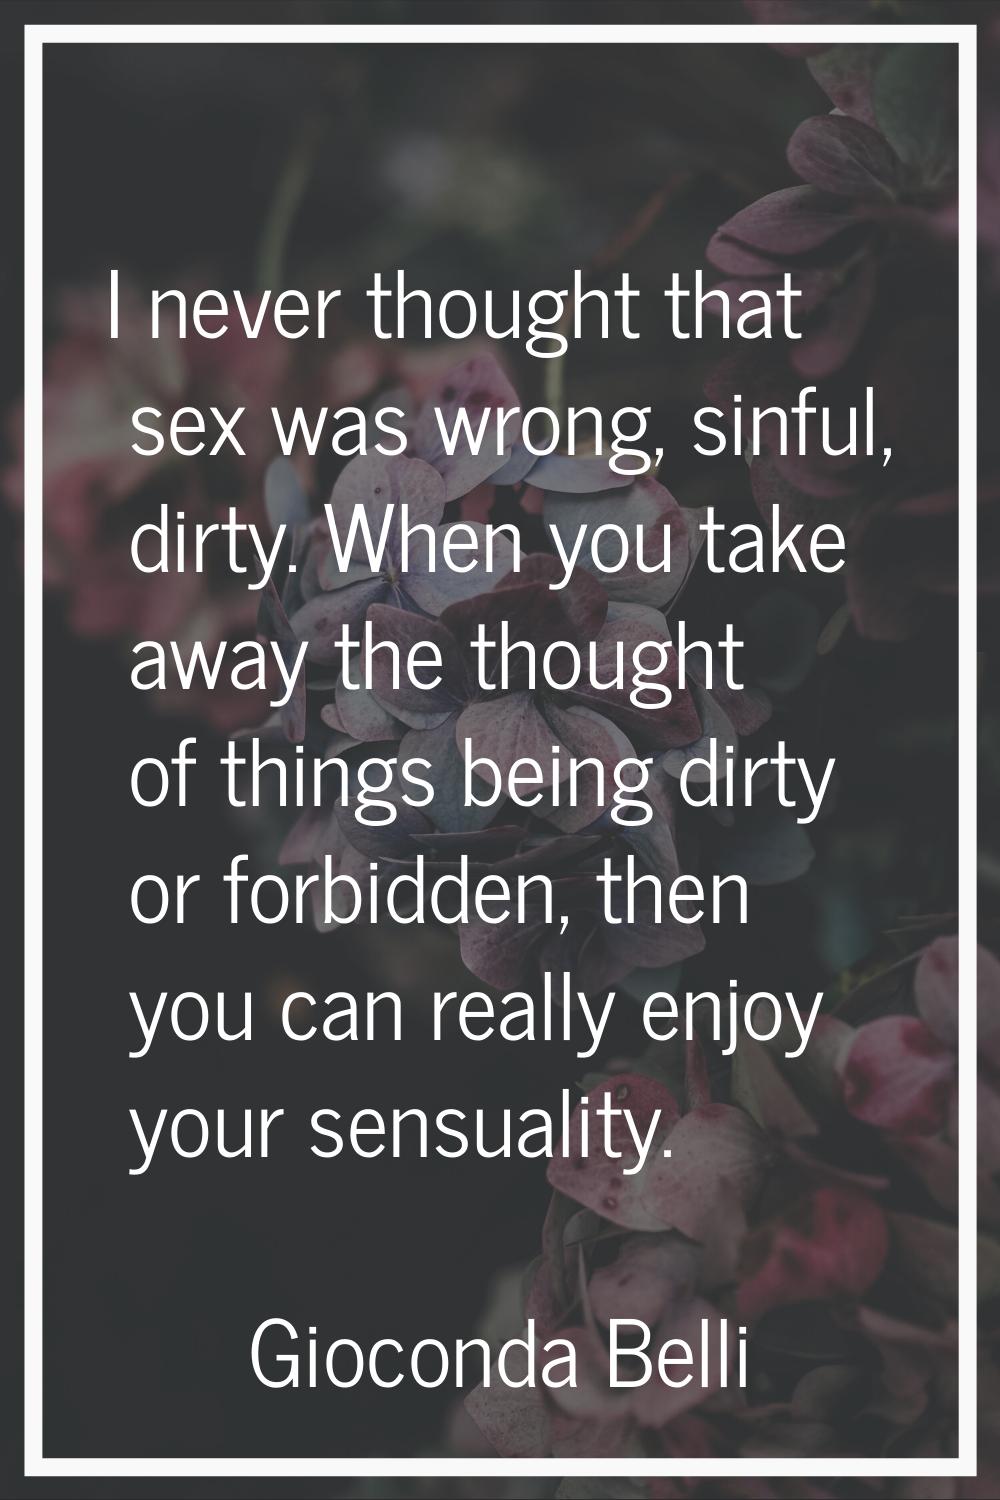 I never thought that sex was wrong, sinful, dirty. When you take away the thought of things being d